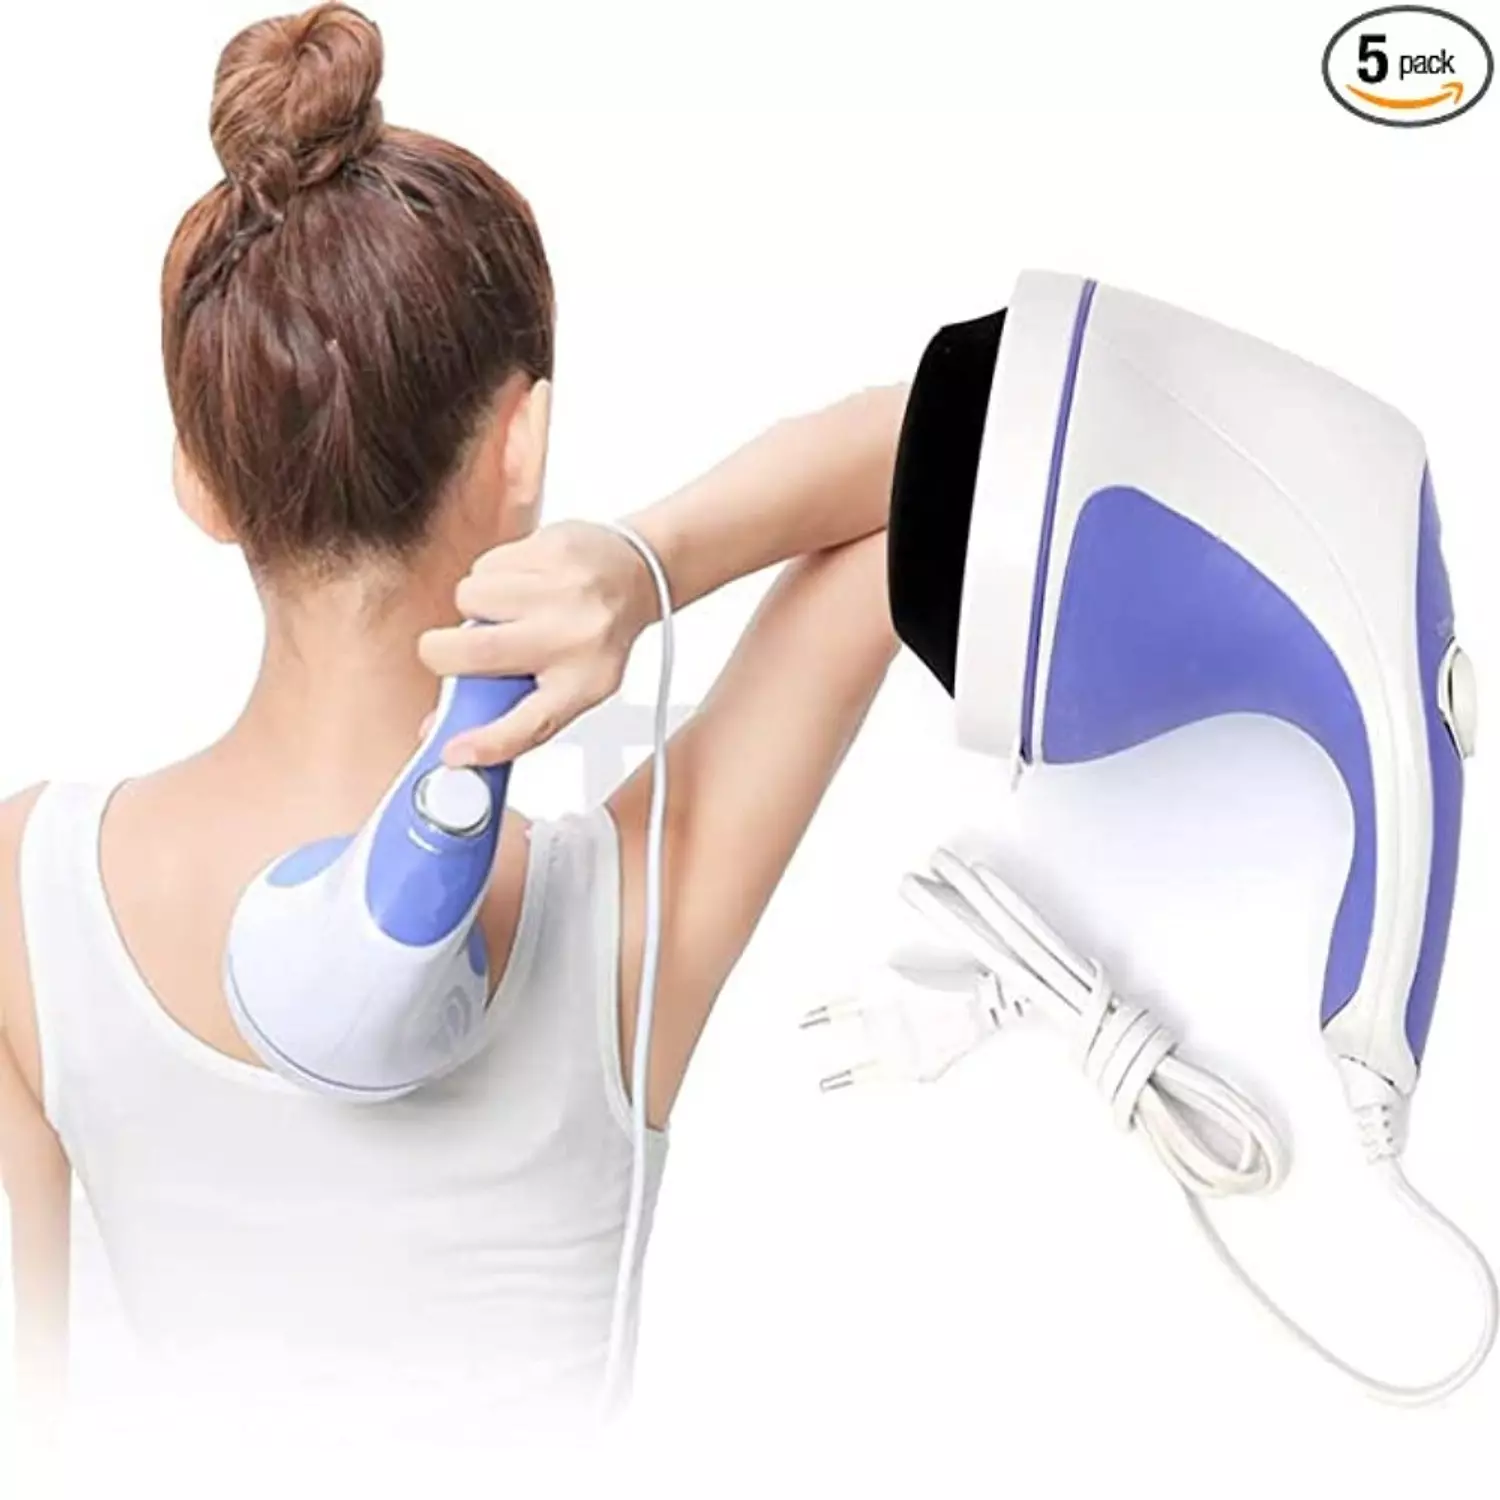 Relax & Tone Massager hover image